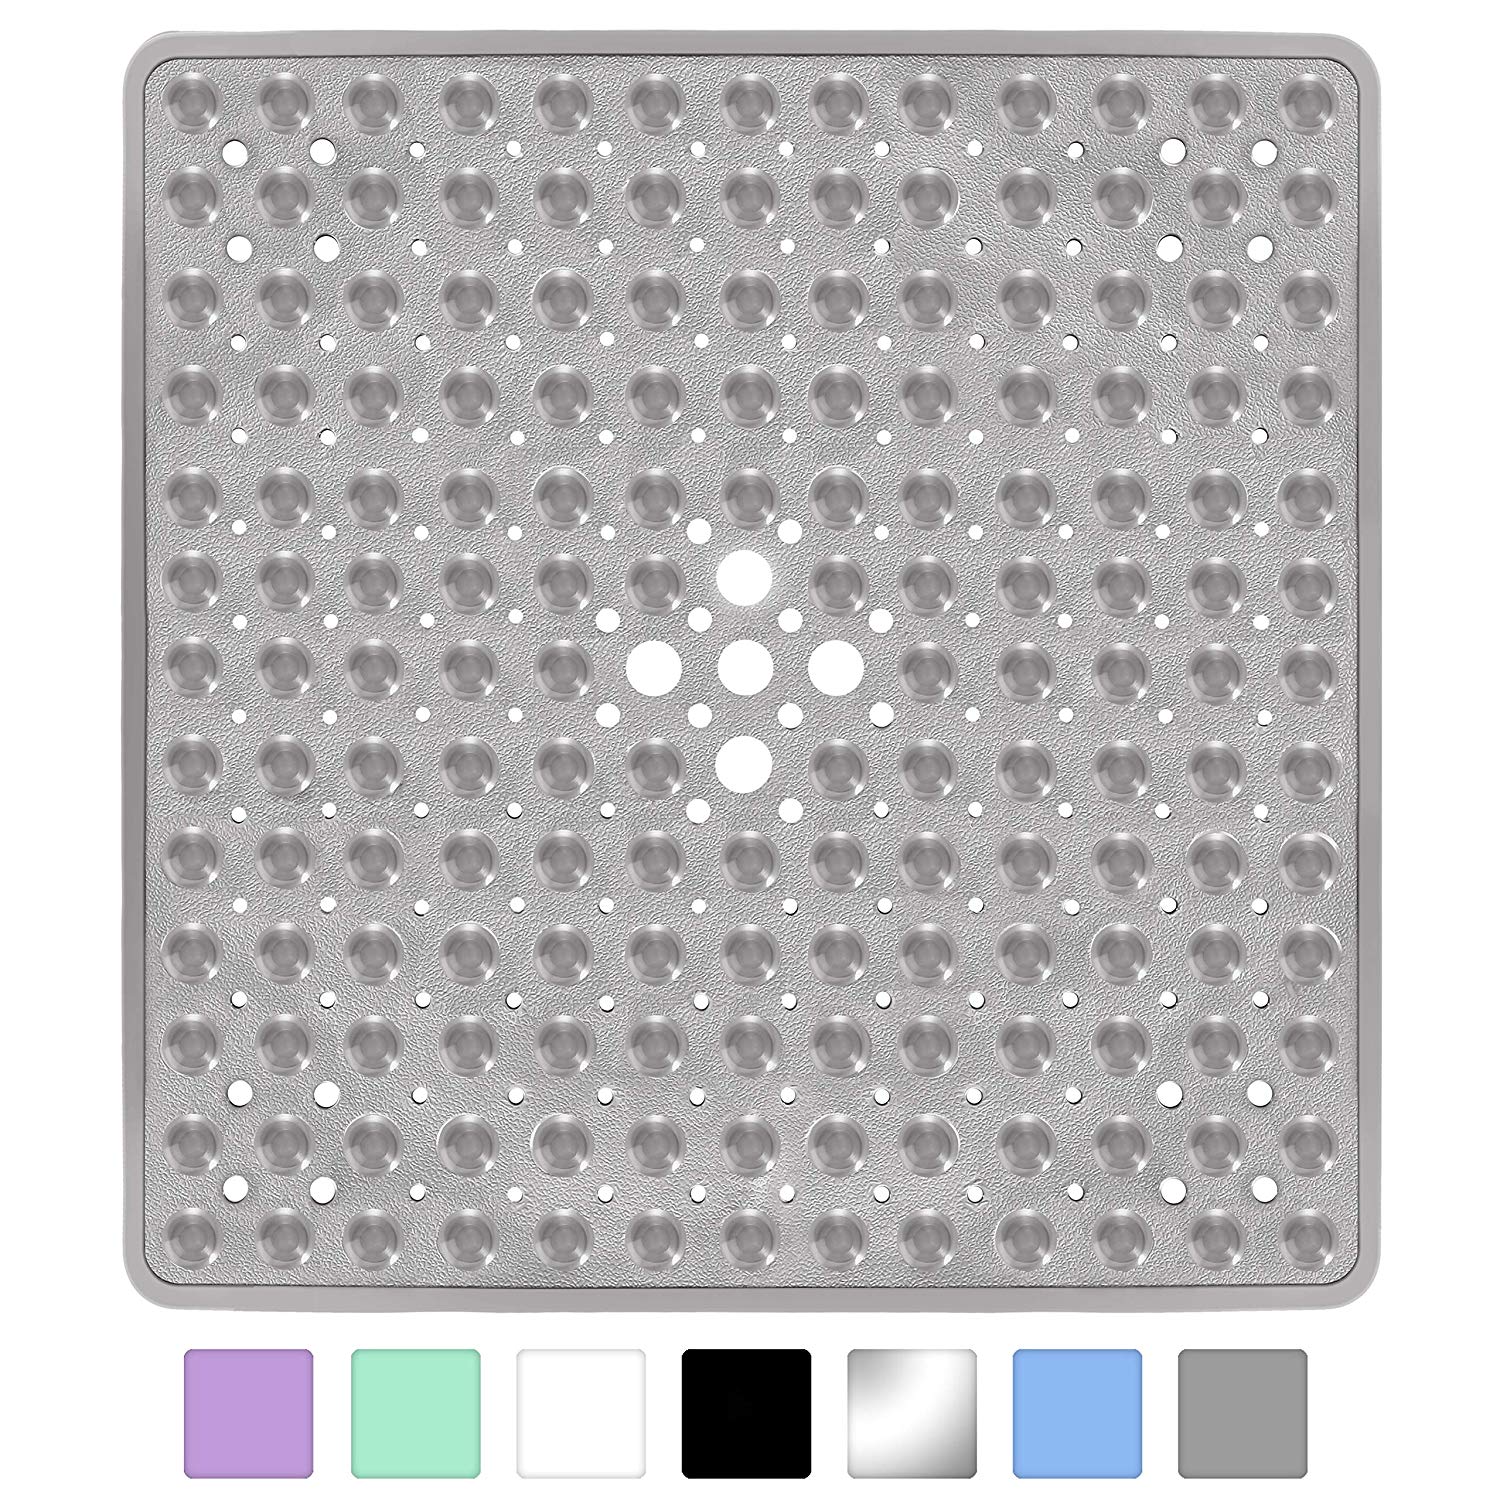 GOTH Perhk Square Non Slip Shower Mats Machine Washable Anti-Bacterial Safety Bath Mat With Suction Cup,Drain Holes for Bathroom Toilet Hotel 